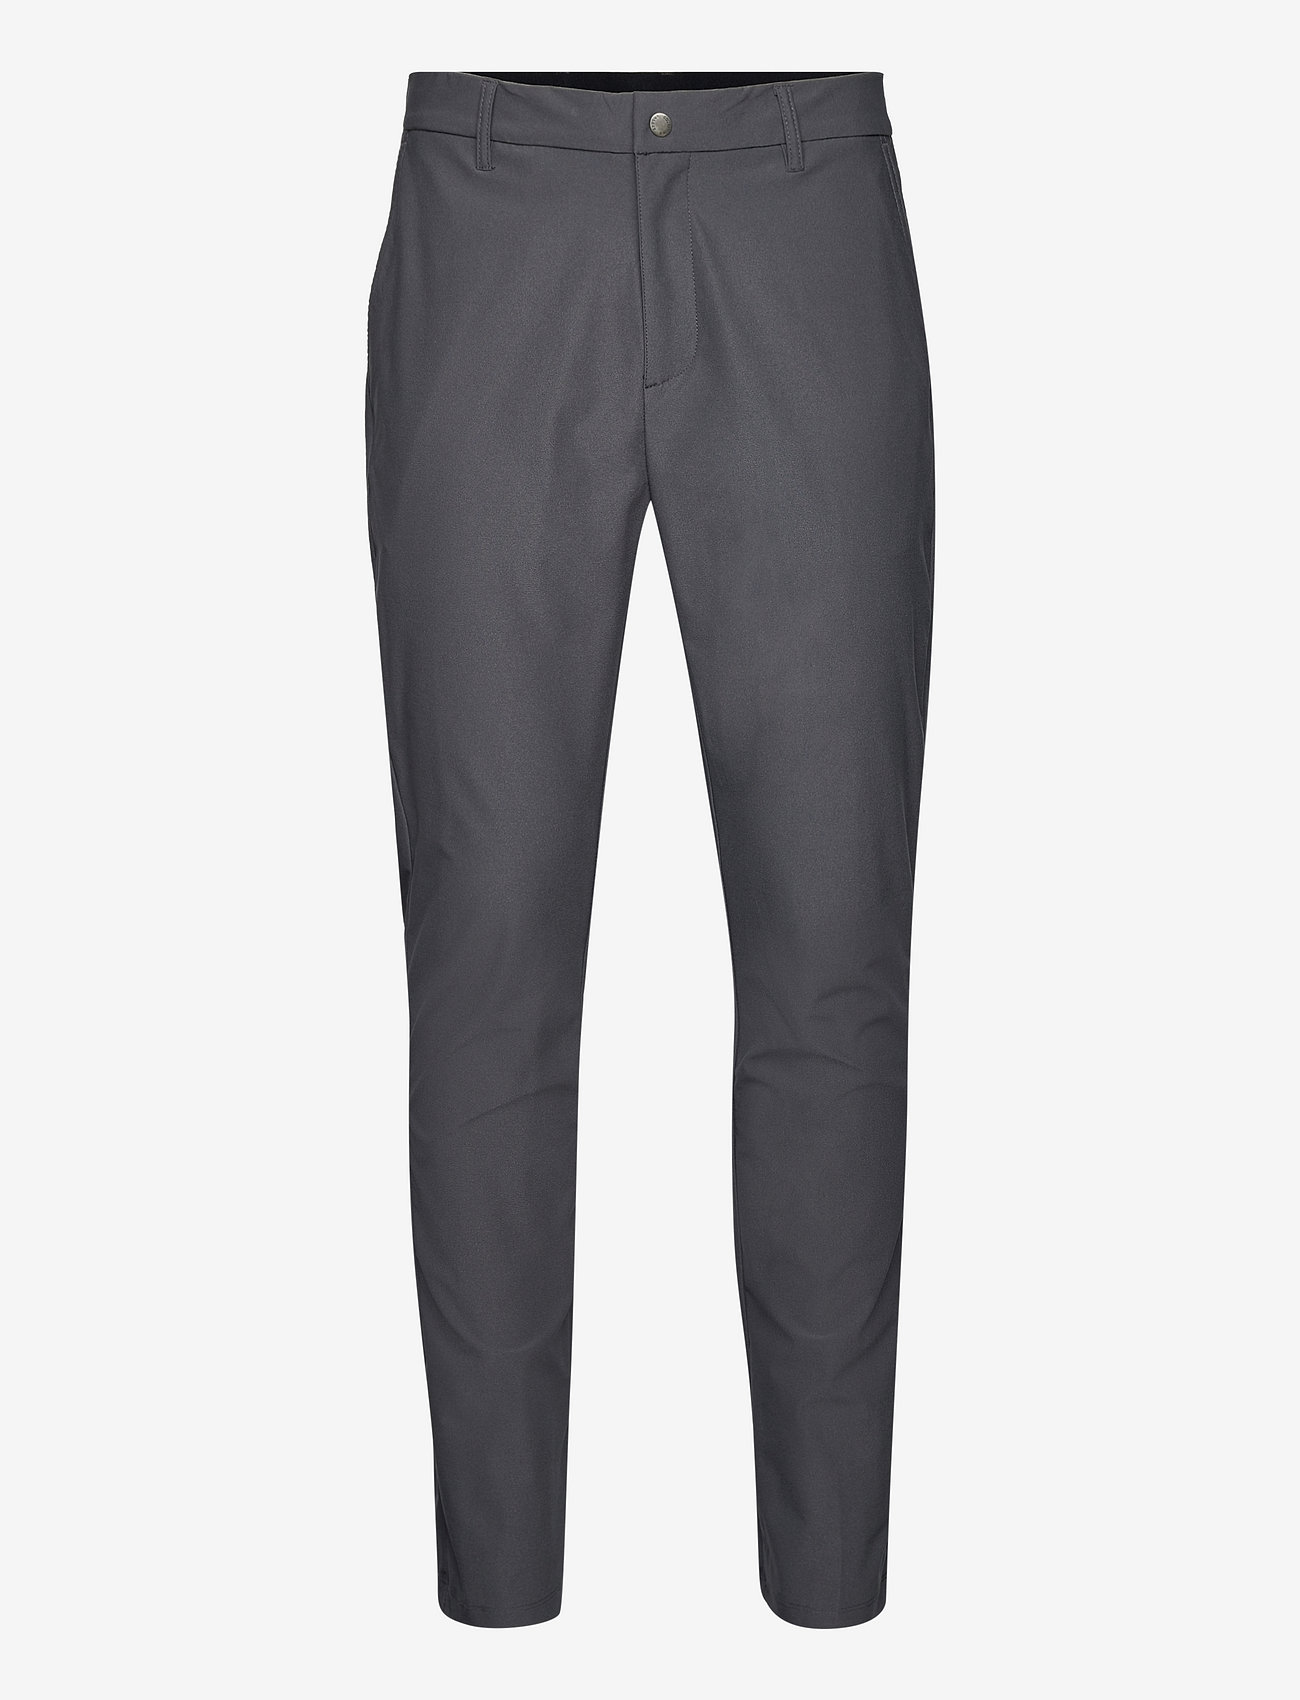 Abacus - Mens Mellion Stretch trousers - golf pants - dk.grey - 0